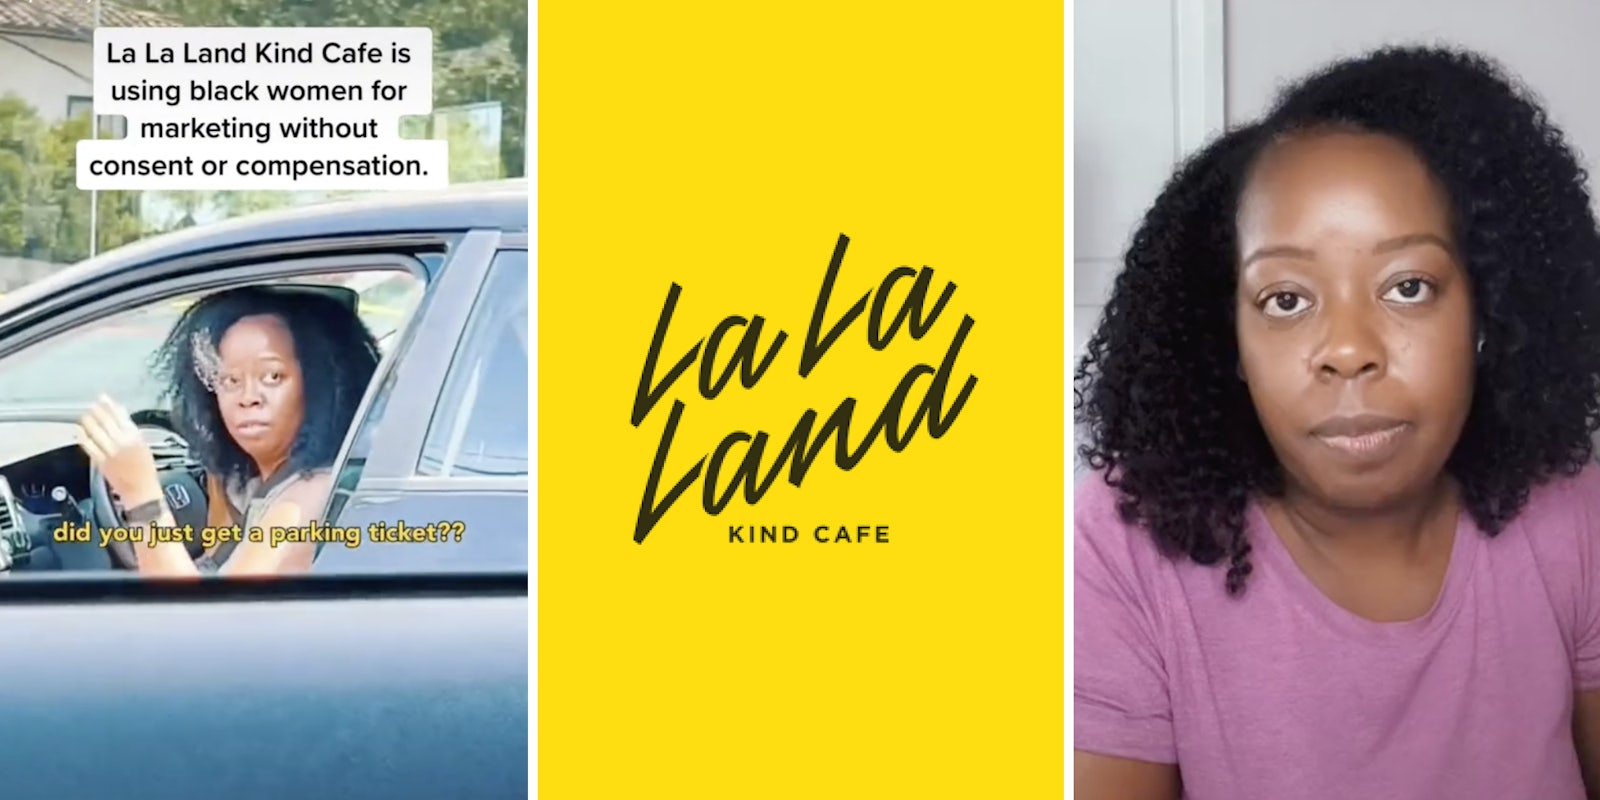 black woman looking out window of car (l) lala land cafe logo (c) black woman staring into camera (r)